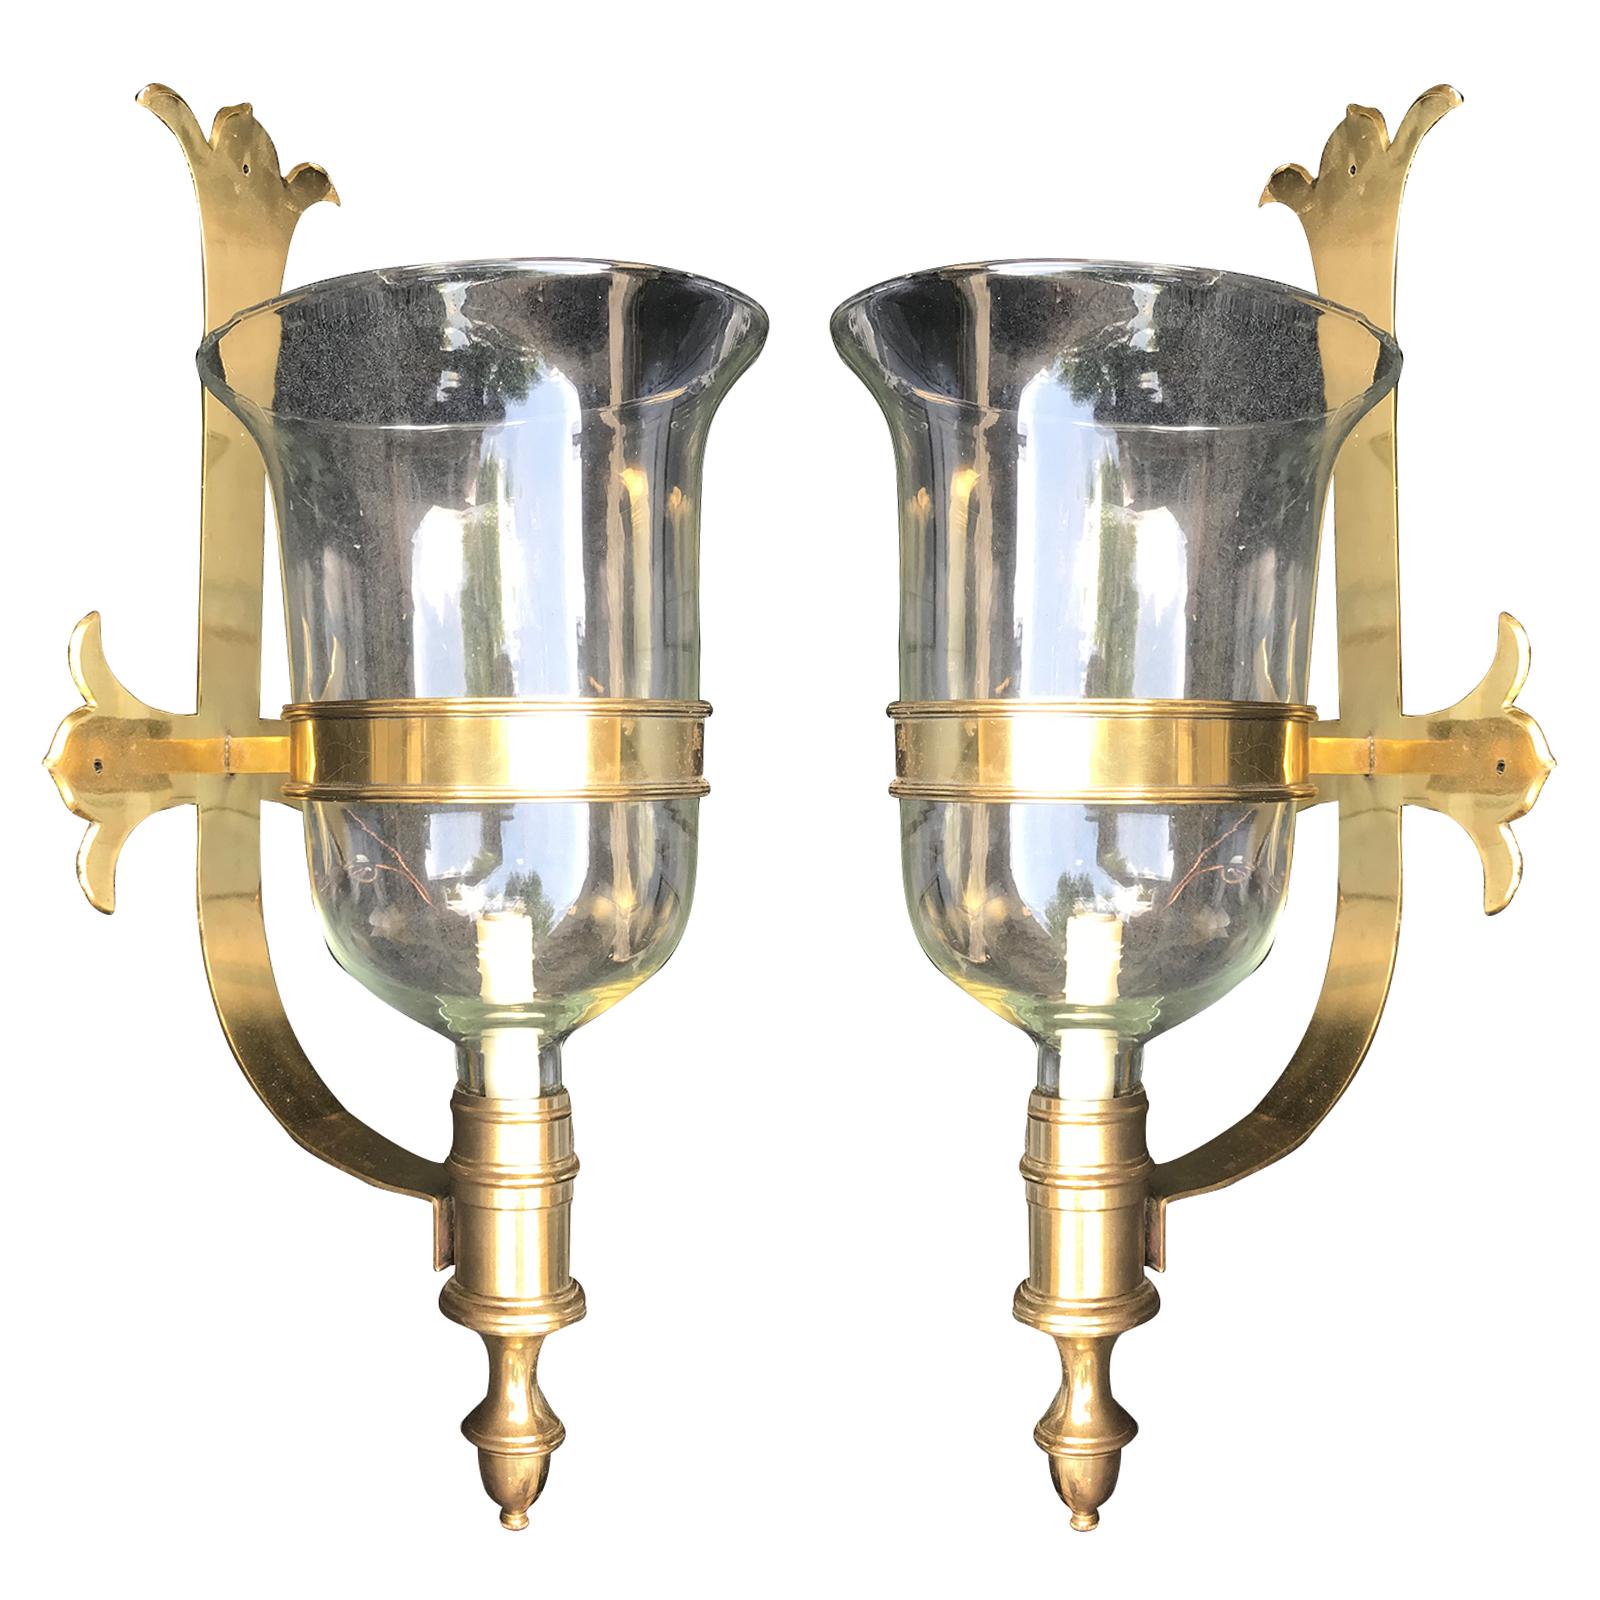 Pair of Brass and Glass Chapman Sconces, circa 1970s